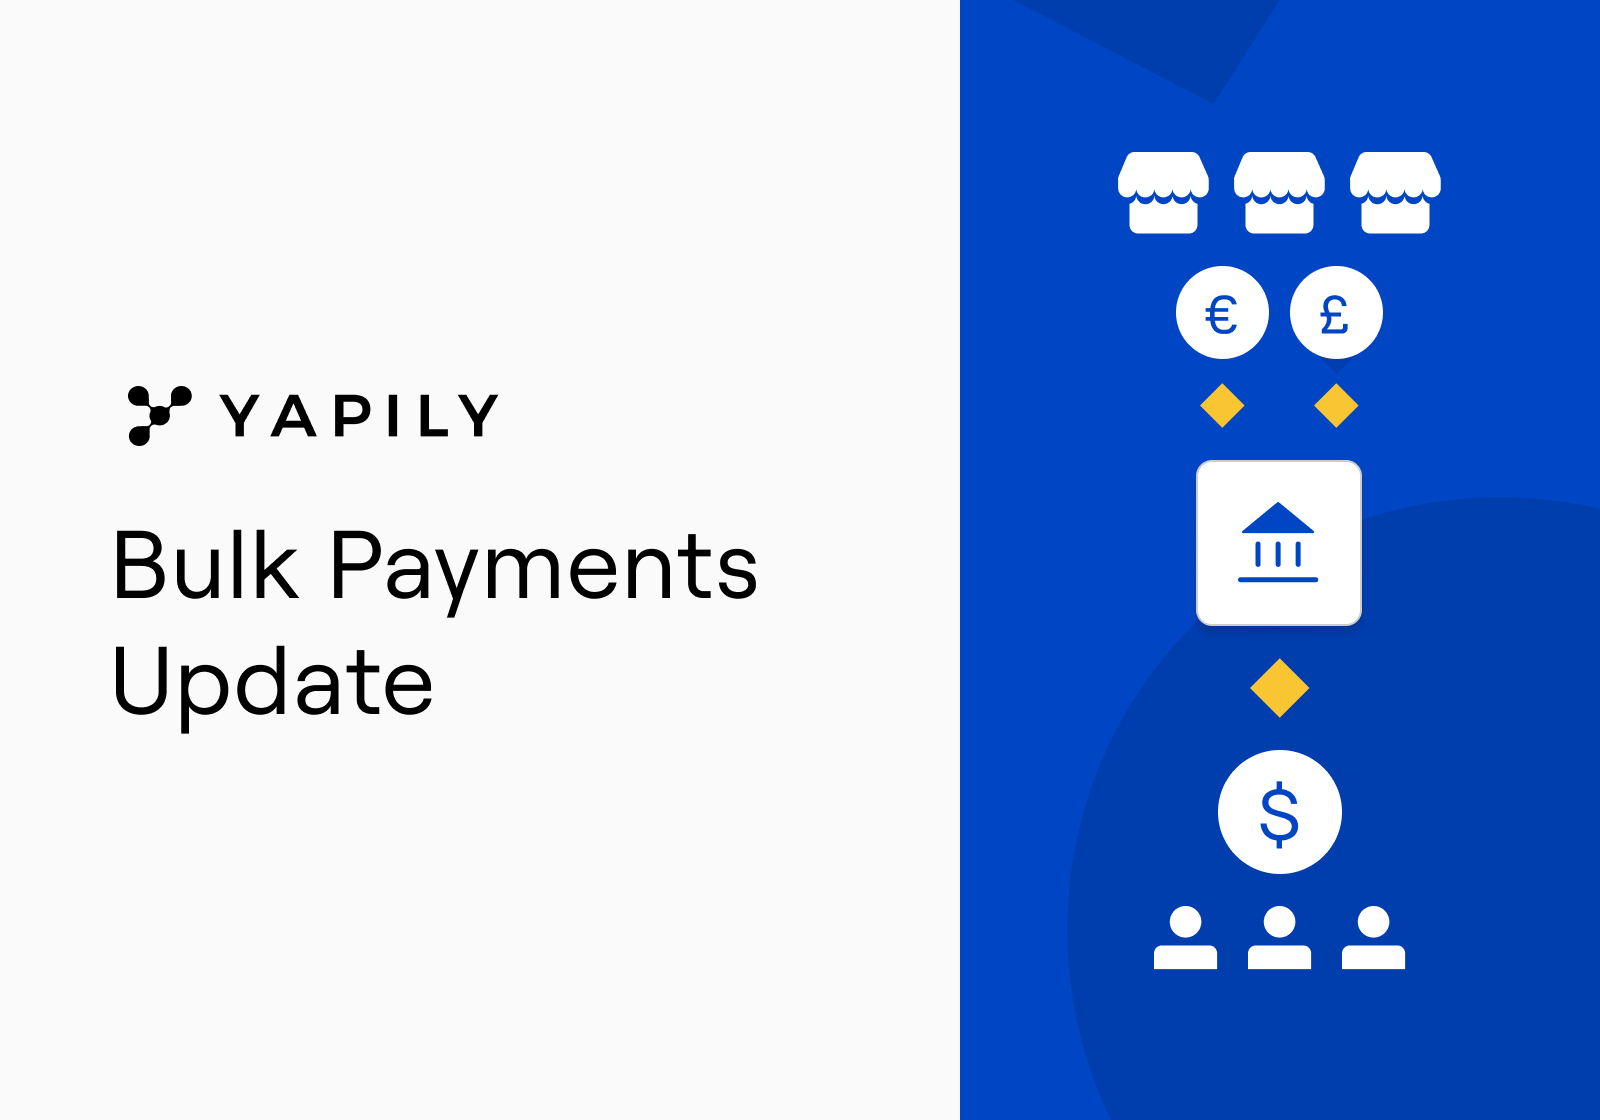 Bulk Payments has been eagerly anticipated by the Open Banking community and by many of our customers. We're glad to be developing and delivering Open Banking Bulk Payments functionality in the UK and in Europe.